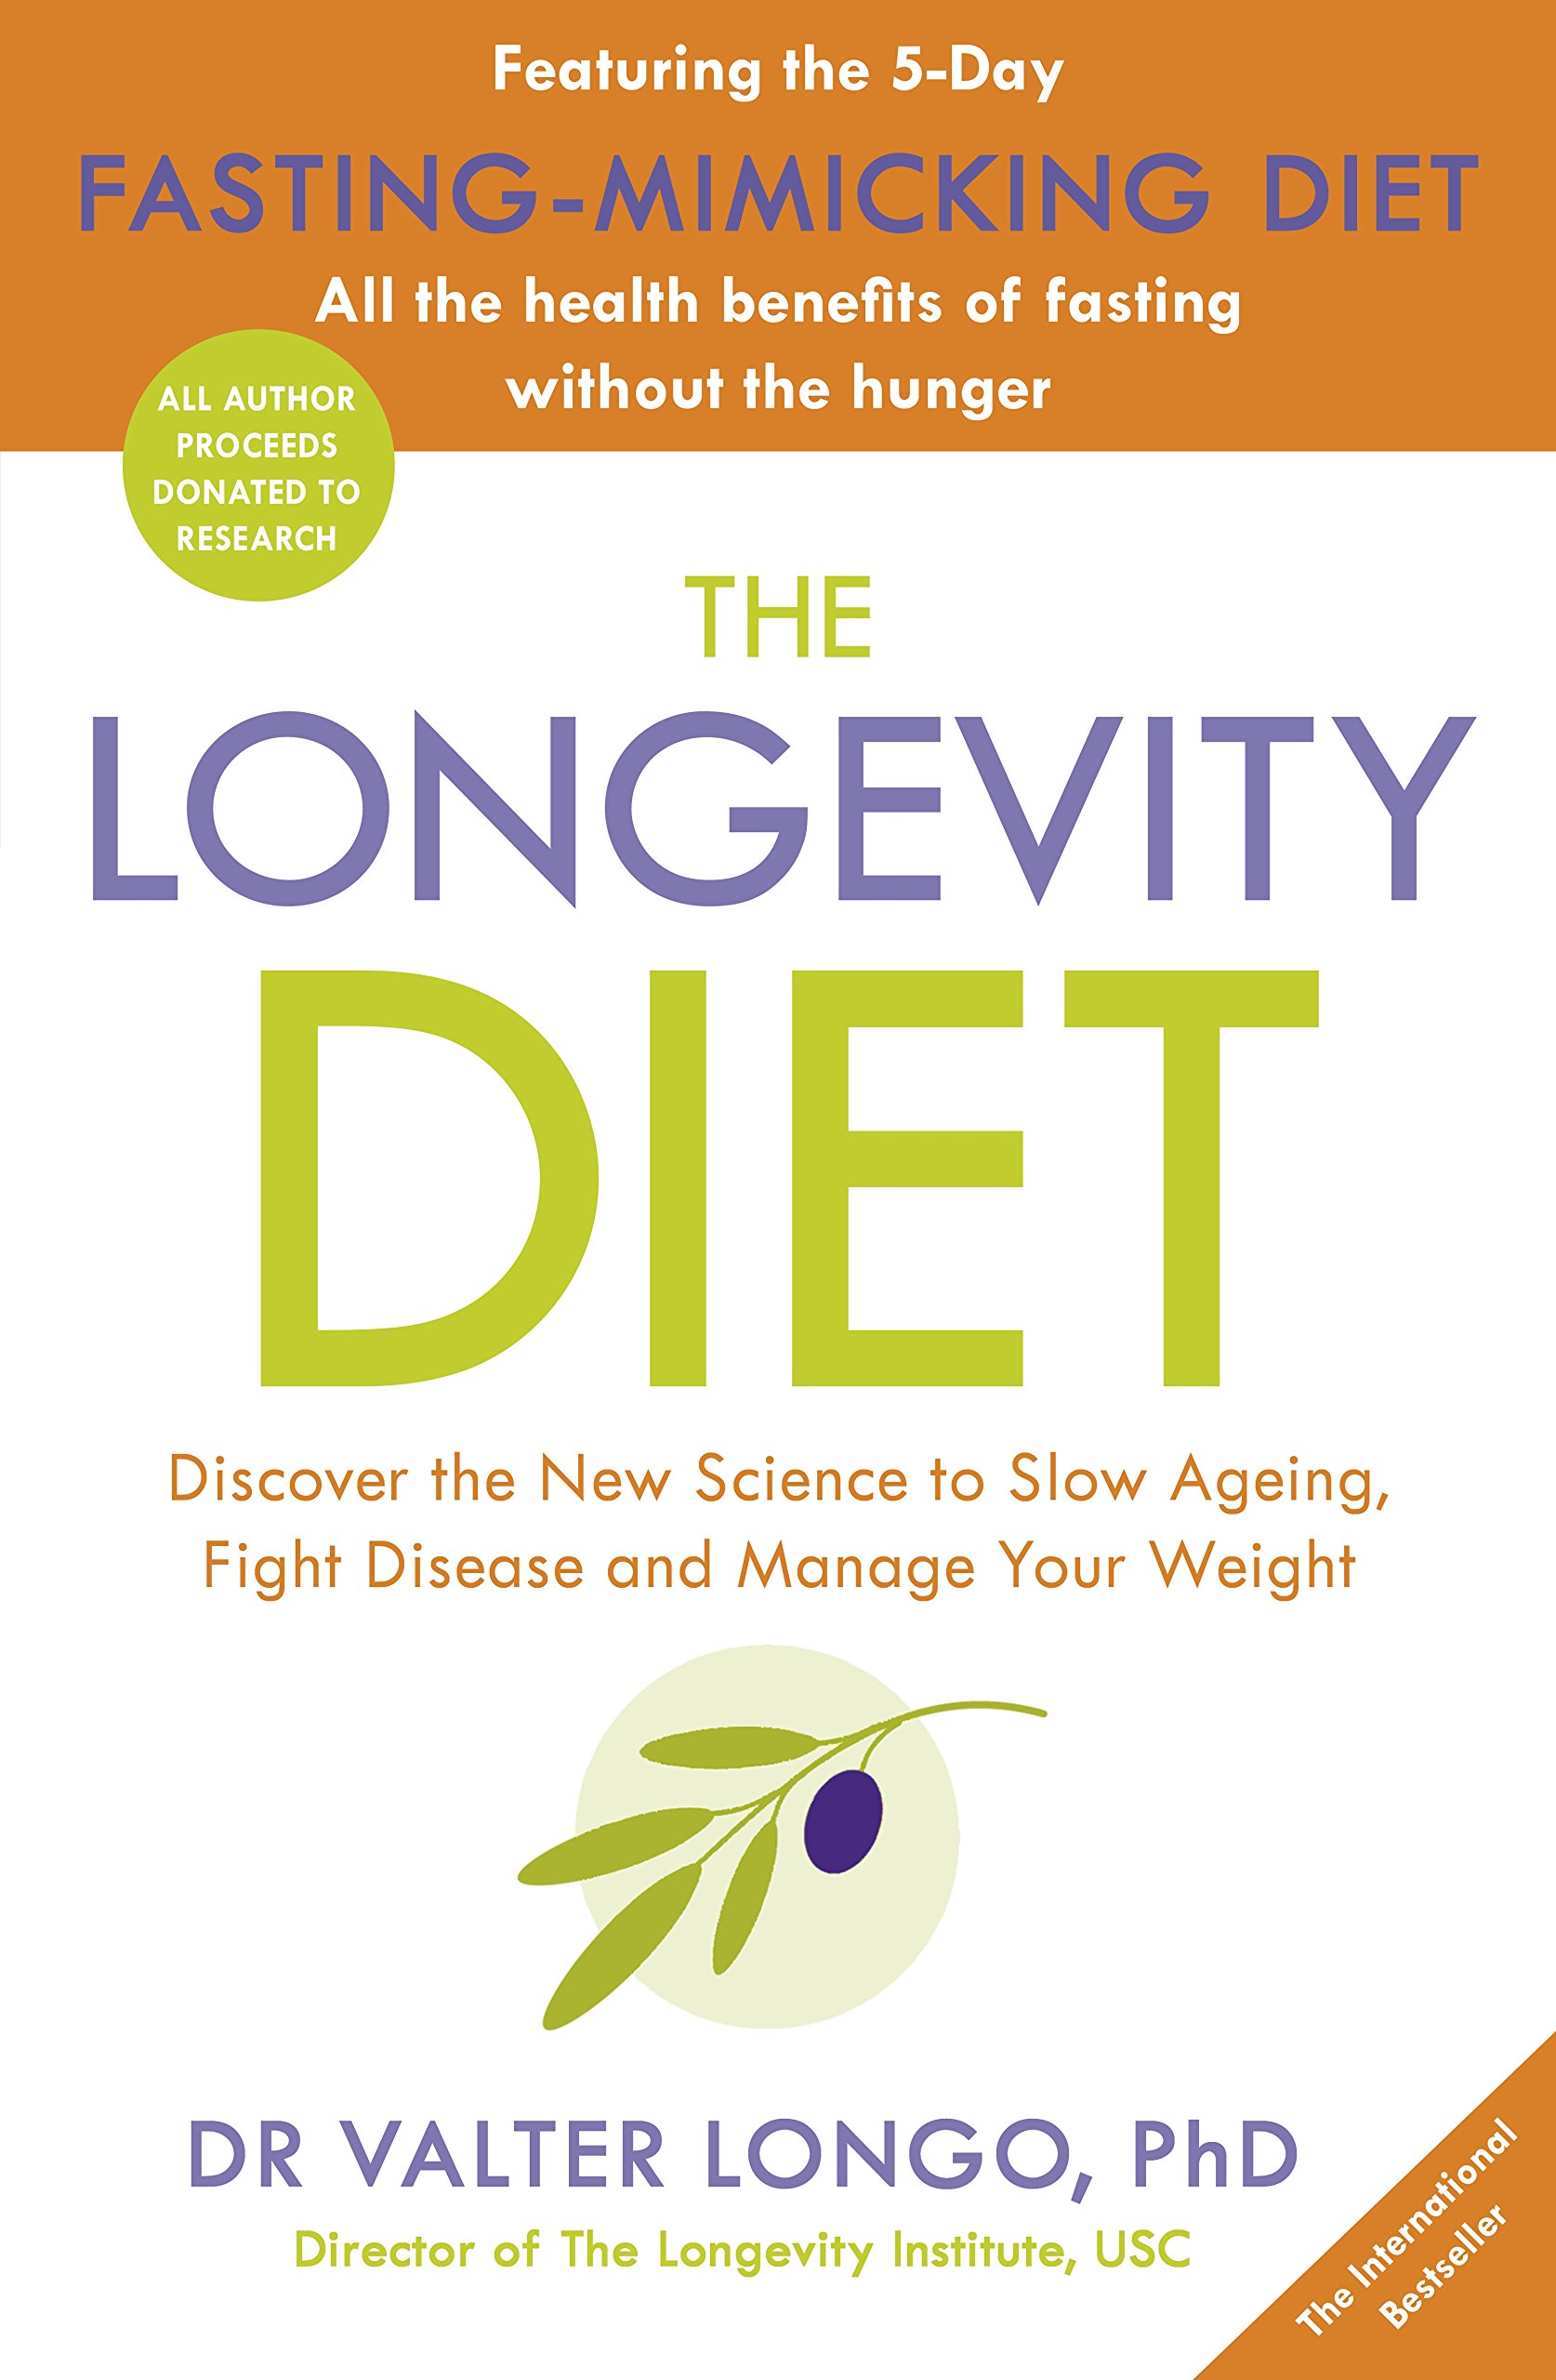 The Longevity Diet: How to live to 100 - Longevity has become the new wellness watchword - nutrition is the key